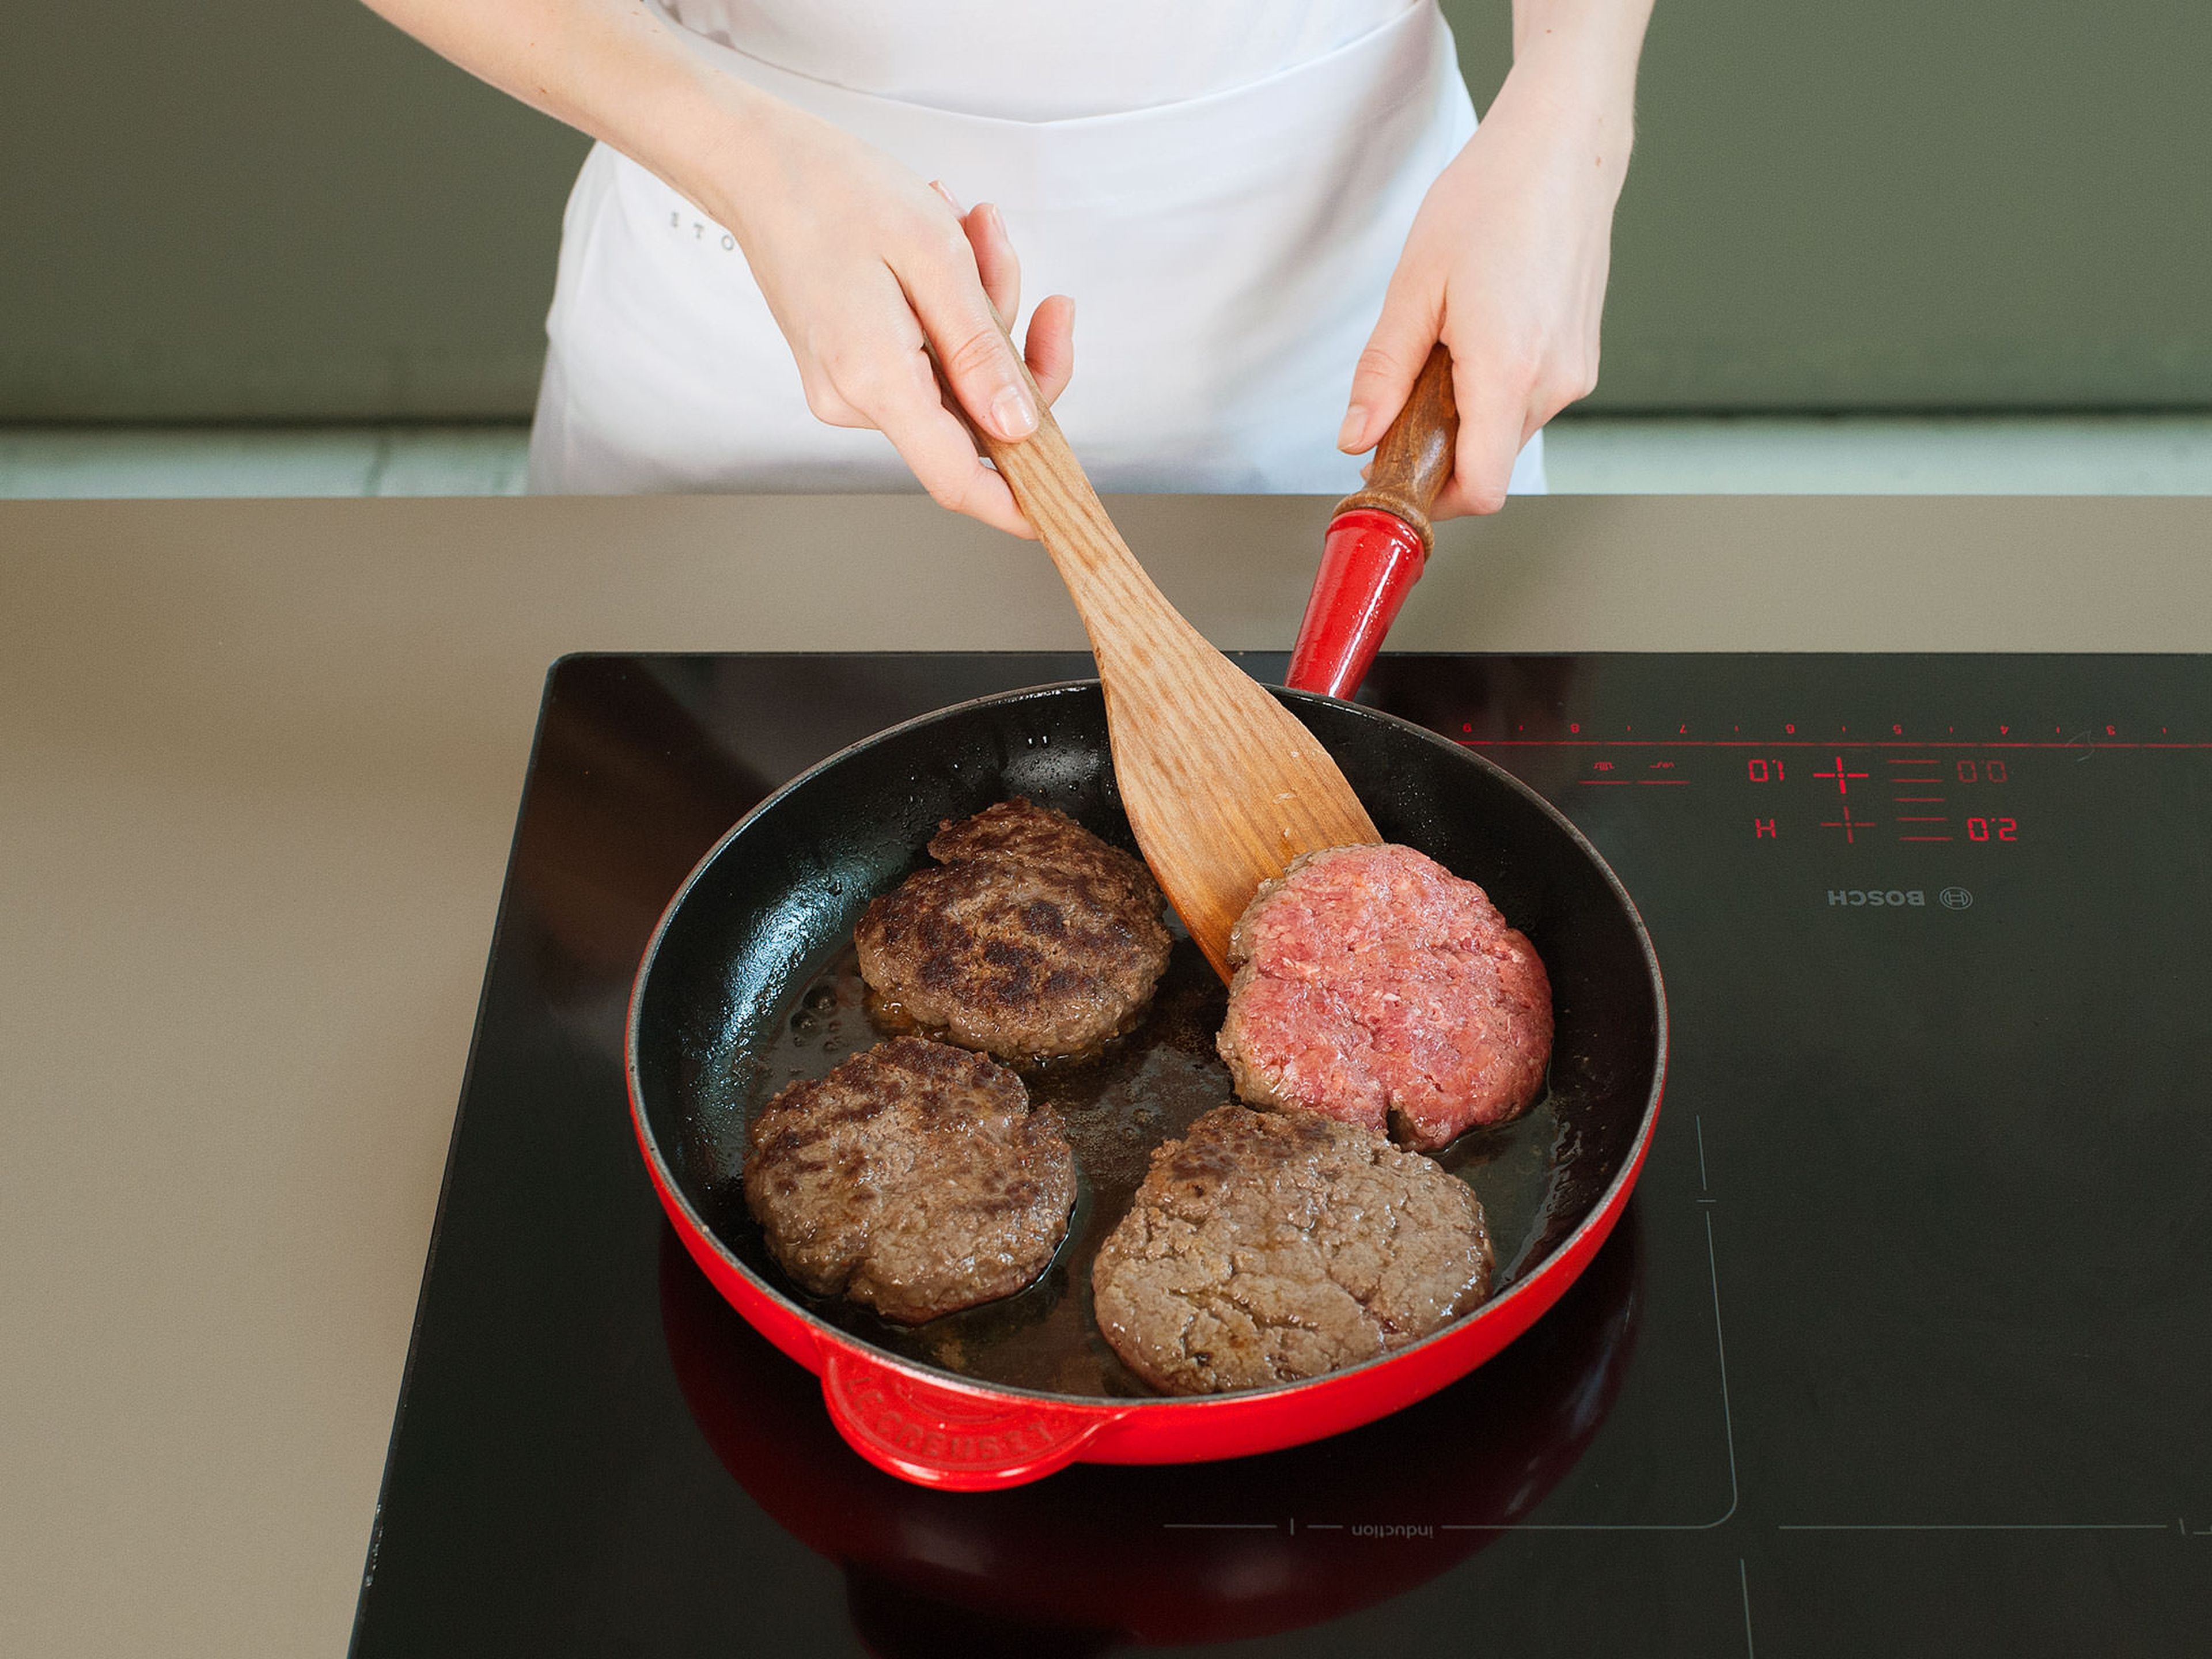 In a large frying pan, sauté burgers in some vegetable oil over medium heat for approx. 3 – 4 min. per side for medium-rare; 4 – 5 min. per side for well-done.